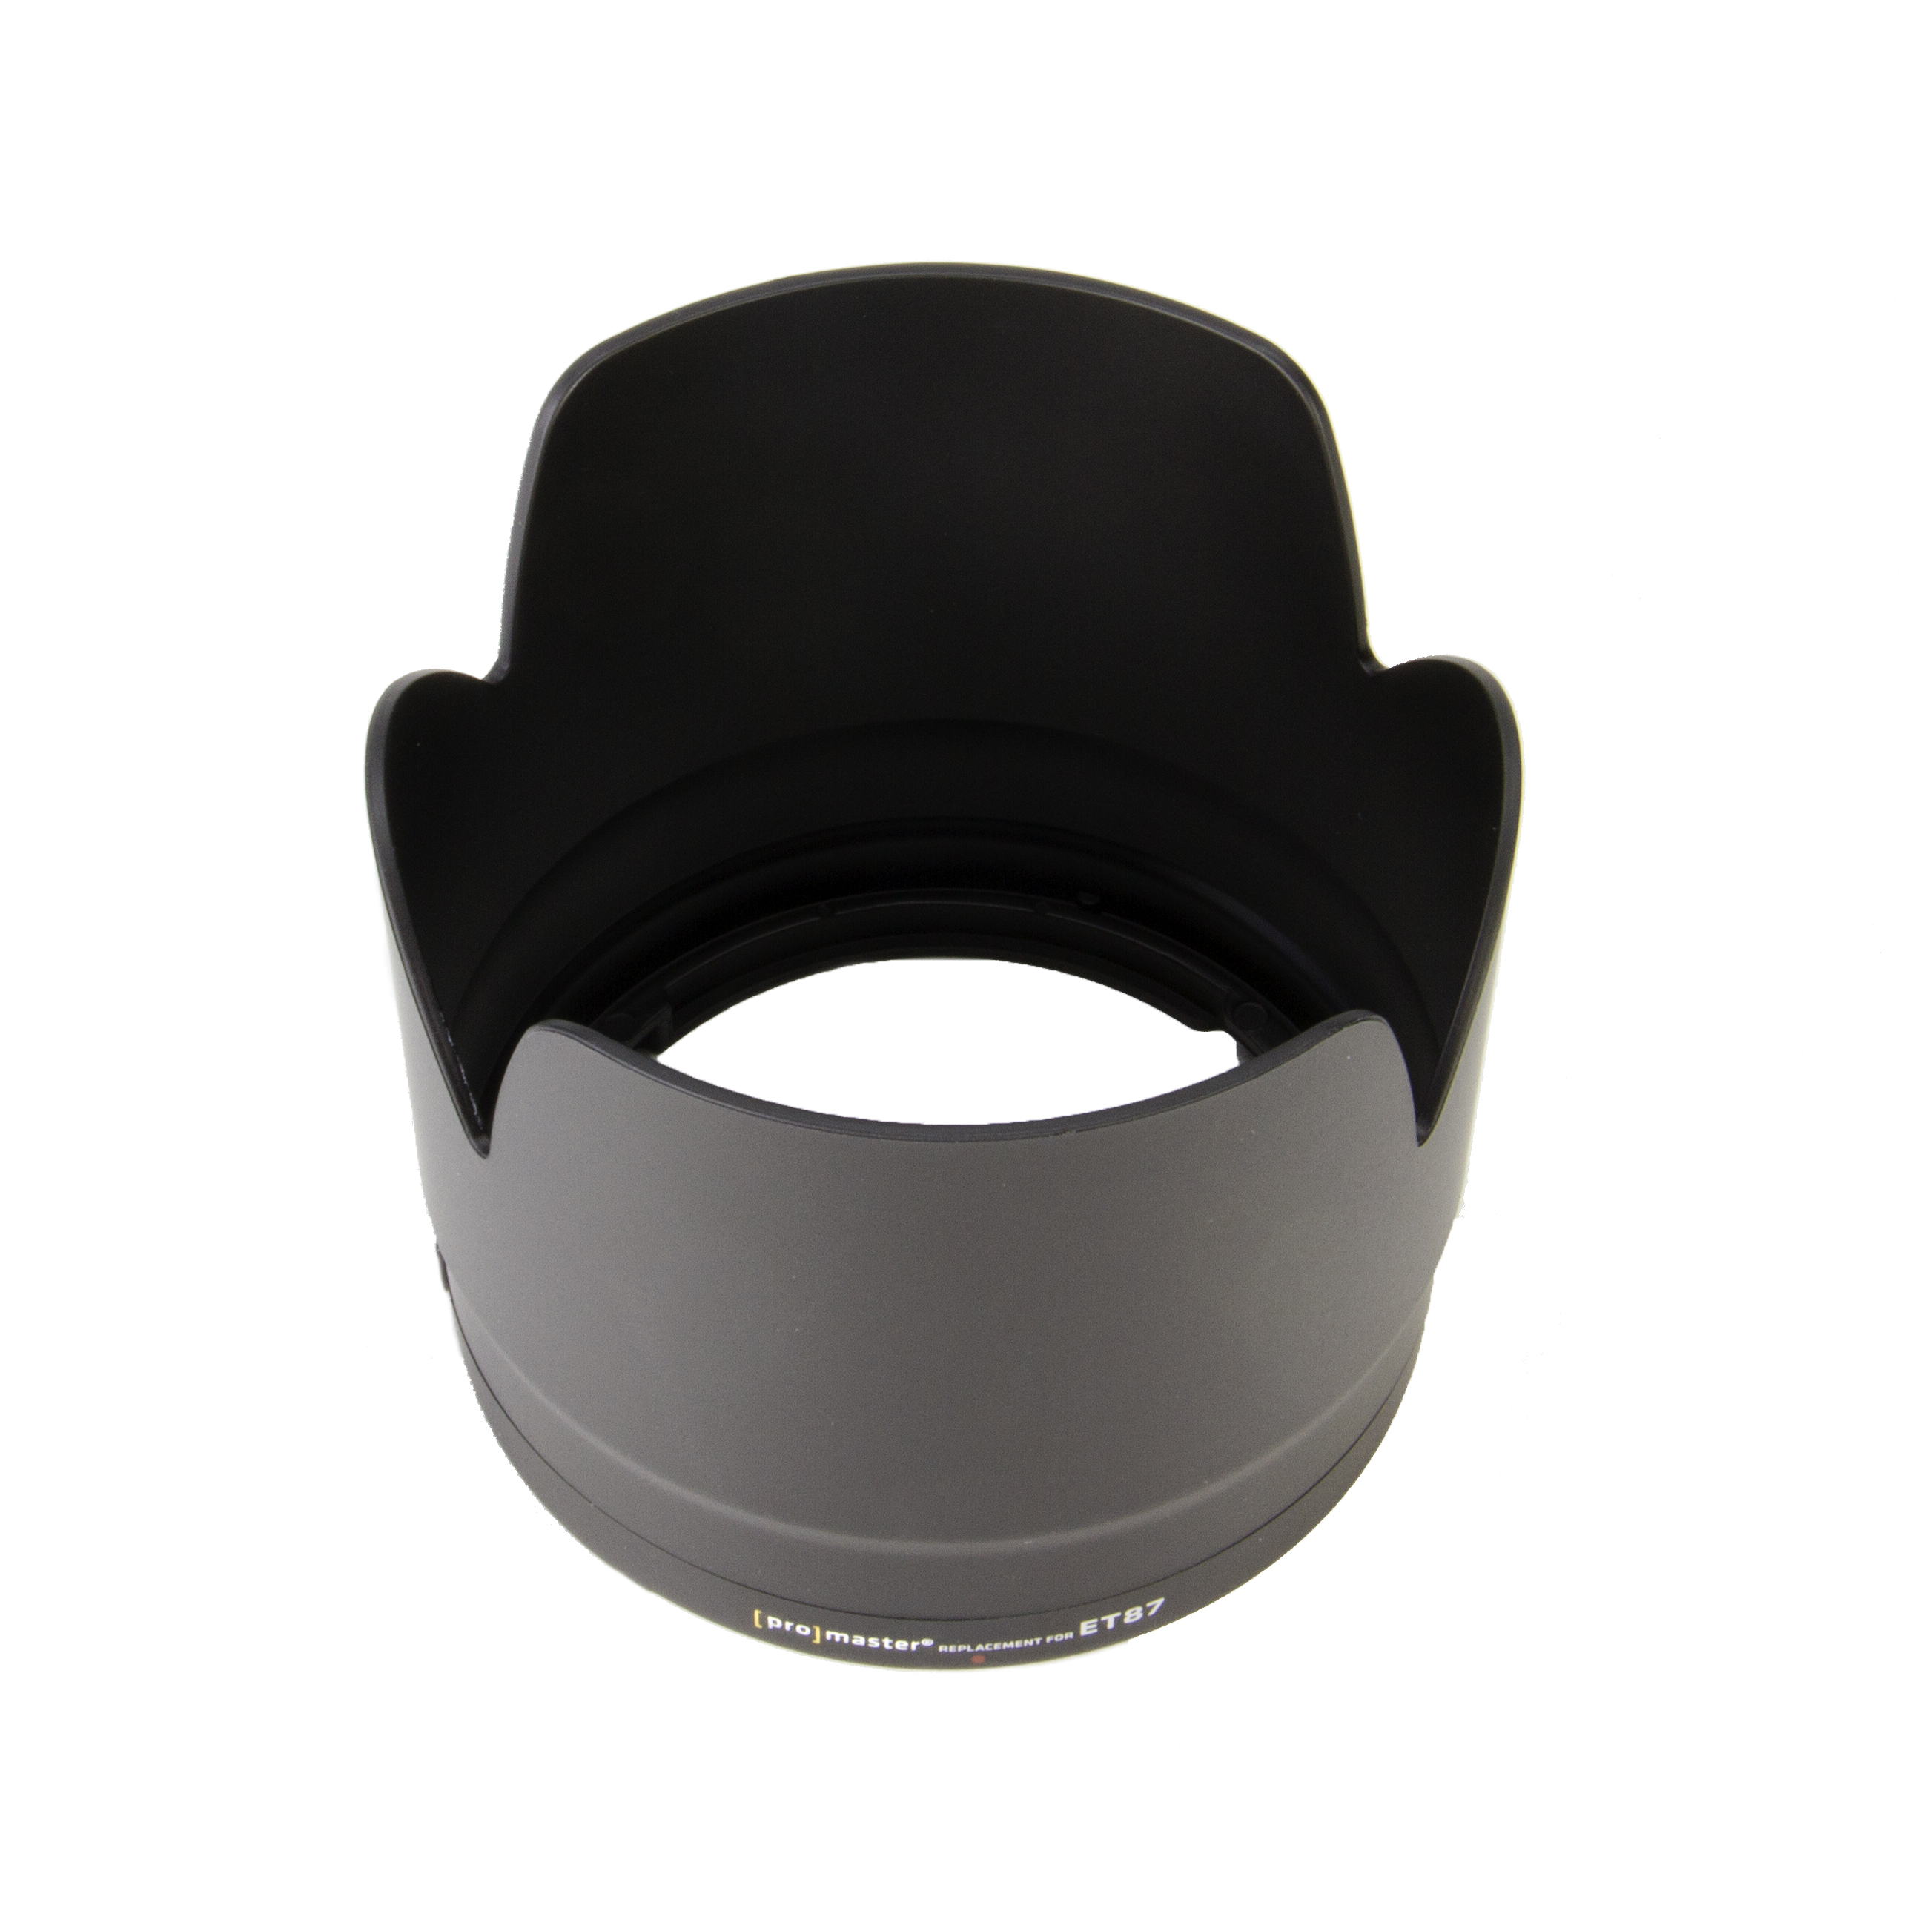 Promaster 3036 ET-87 Hood for Canon